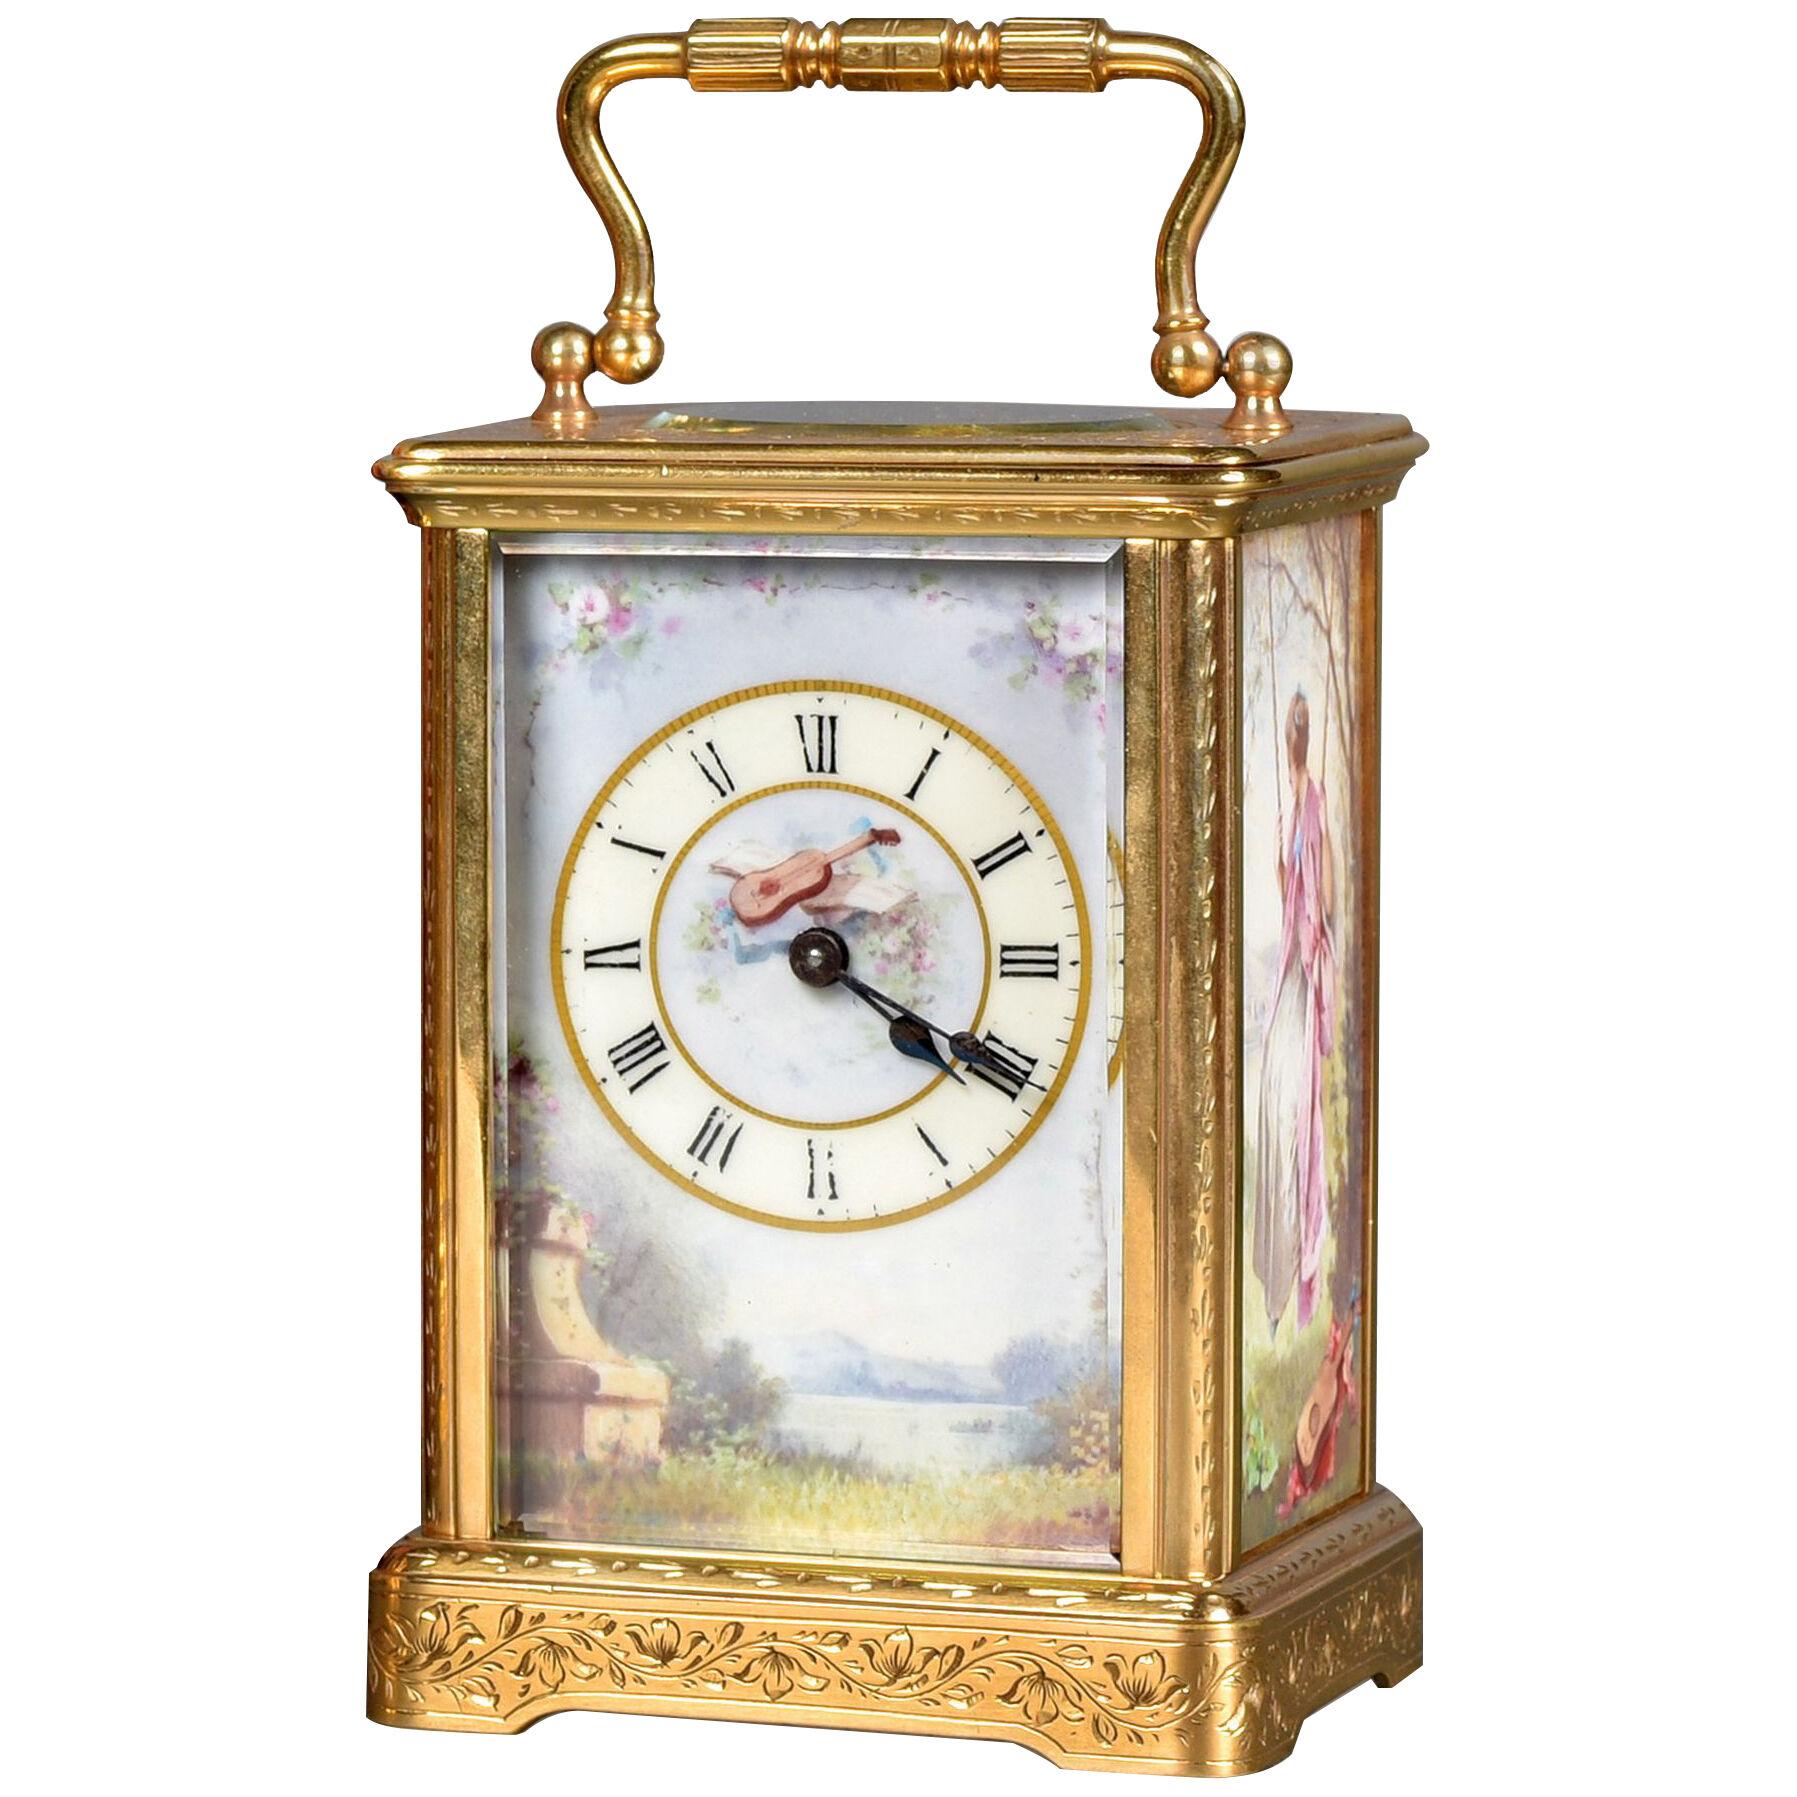 RICHARD & C°. A BEAUTIFUL FRENCH SMALL PORCELAIN PANELLED CARRIAGE TIMEPIECE